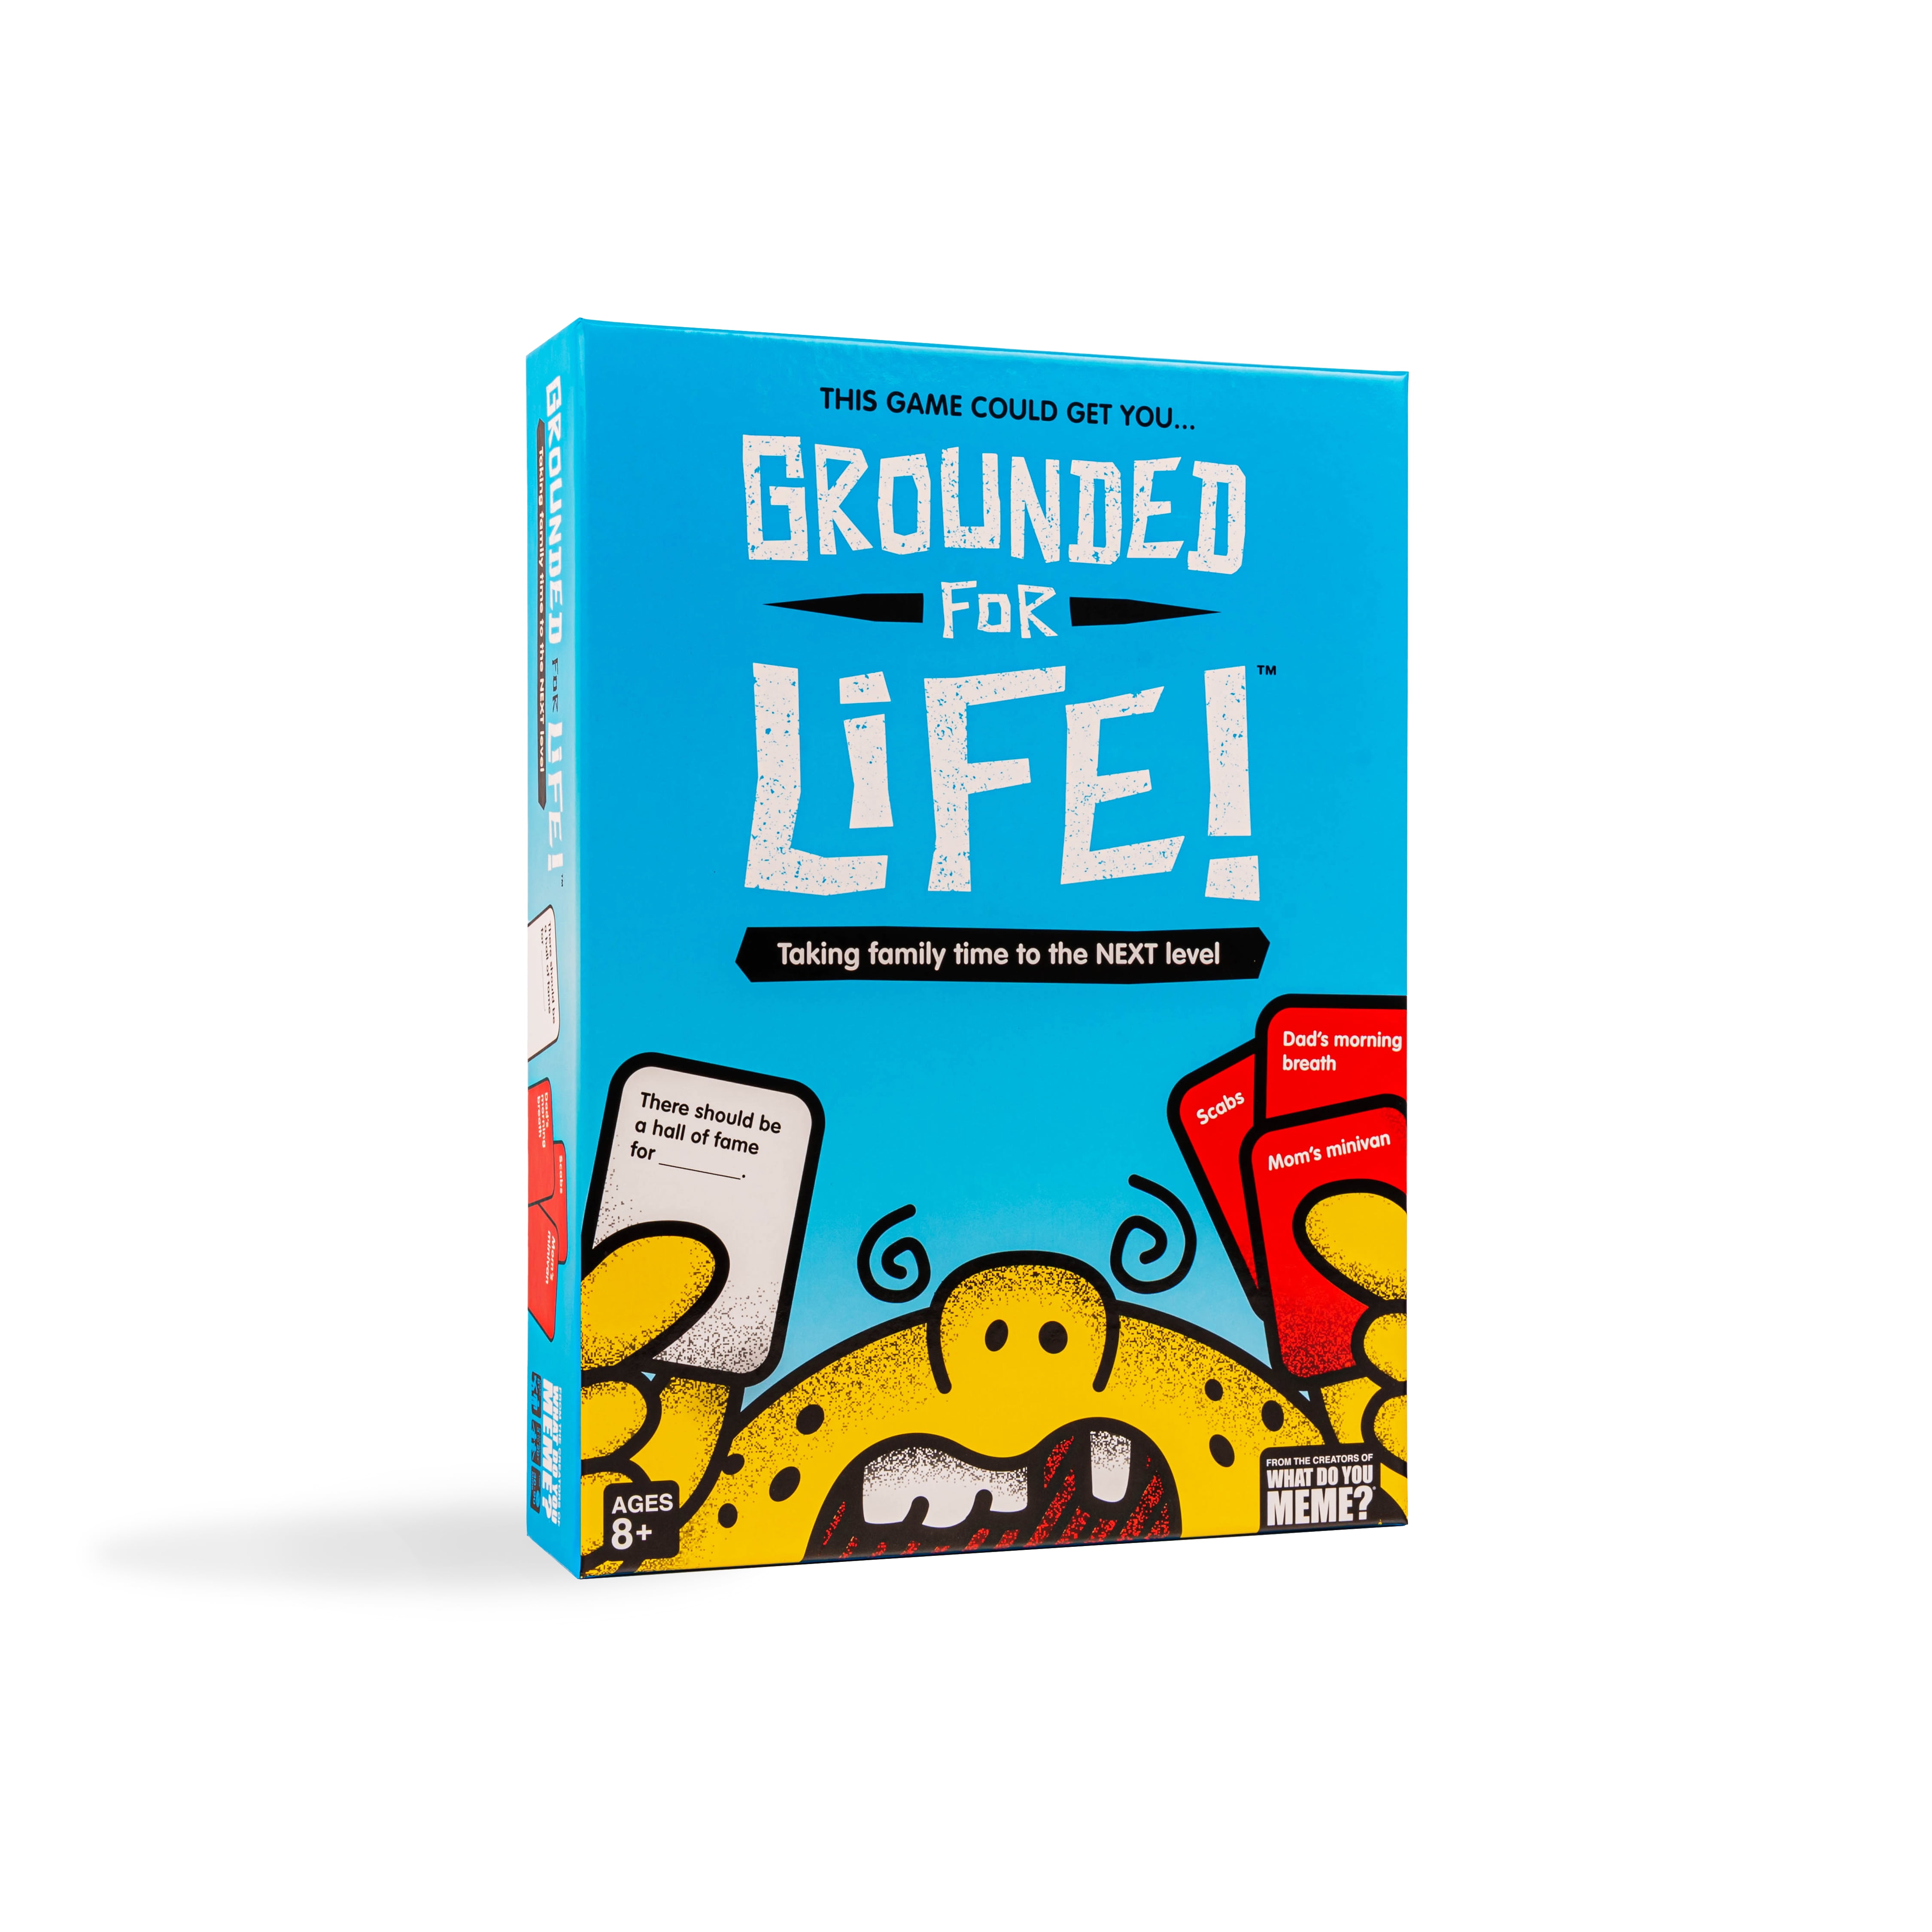 Grounded For Life  The Hilarious & Ultimate Family Card Game  by What Do You Meme? Family